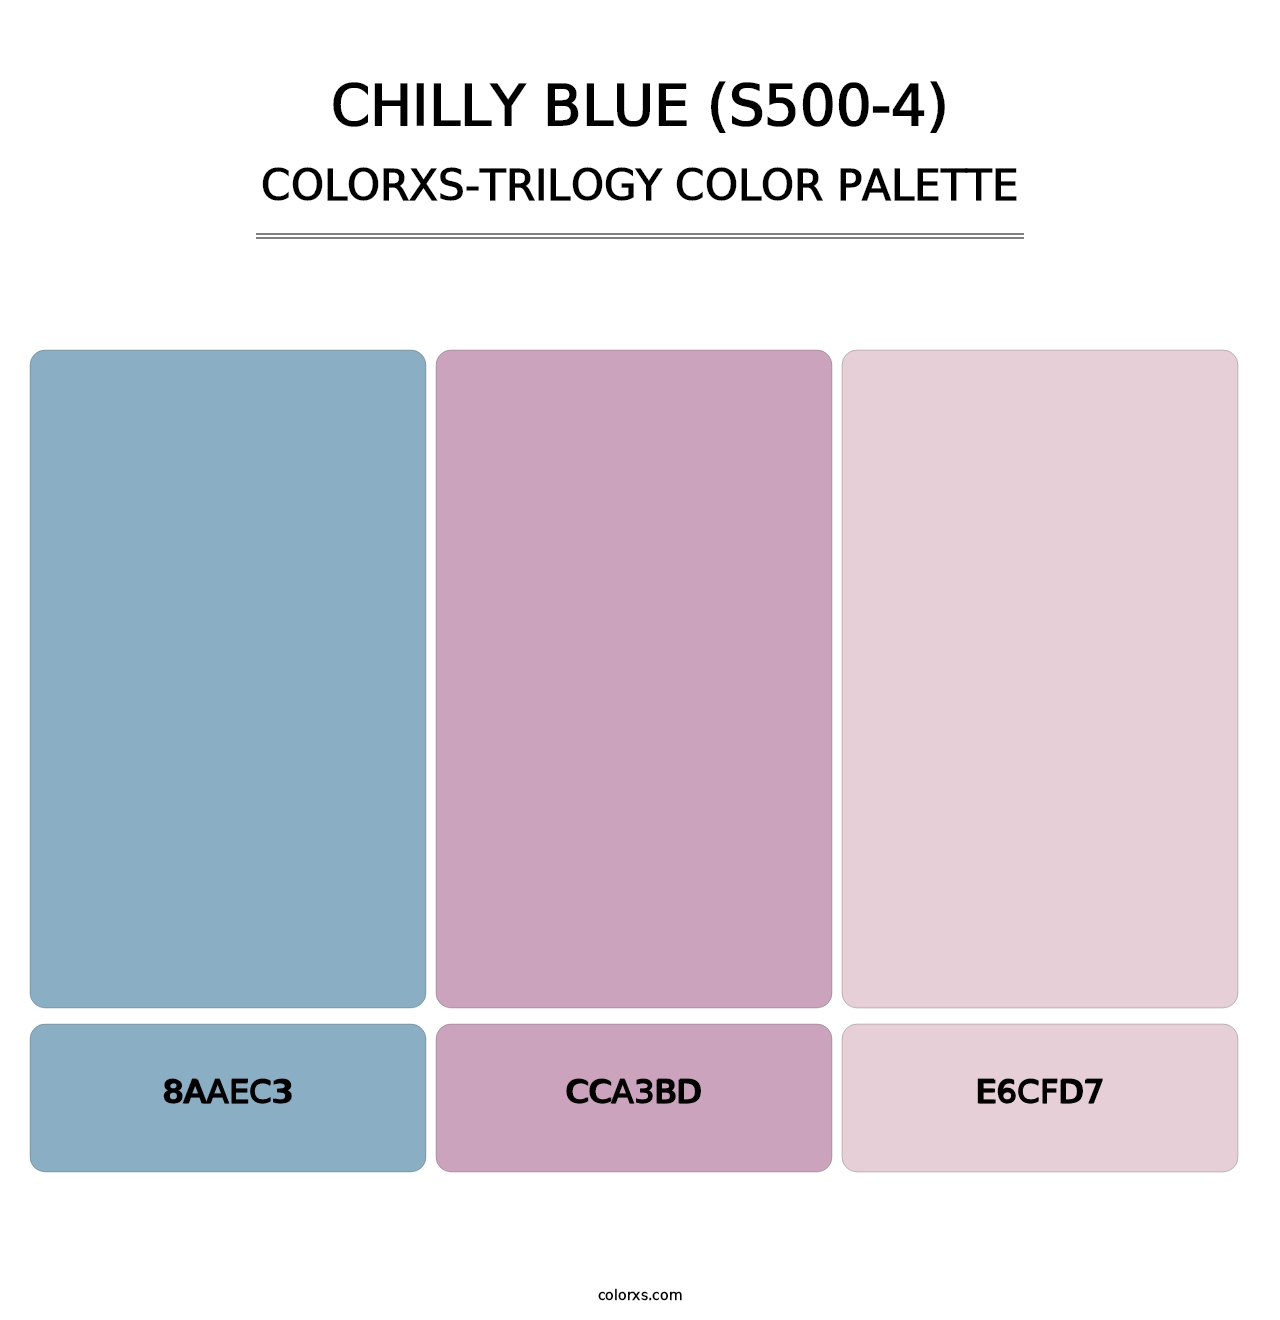 Chilly Blue (S500-4) - Colorxs Trilogy Palette